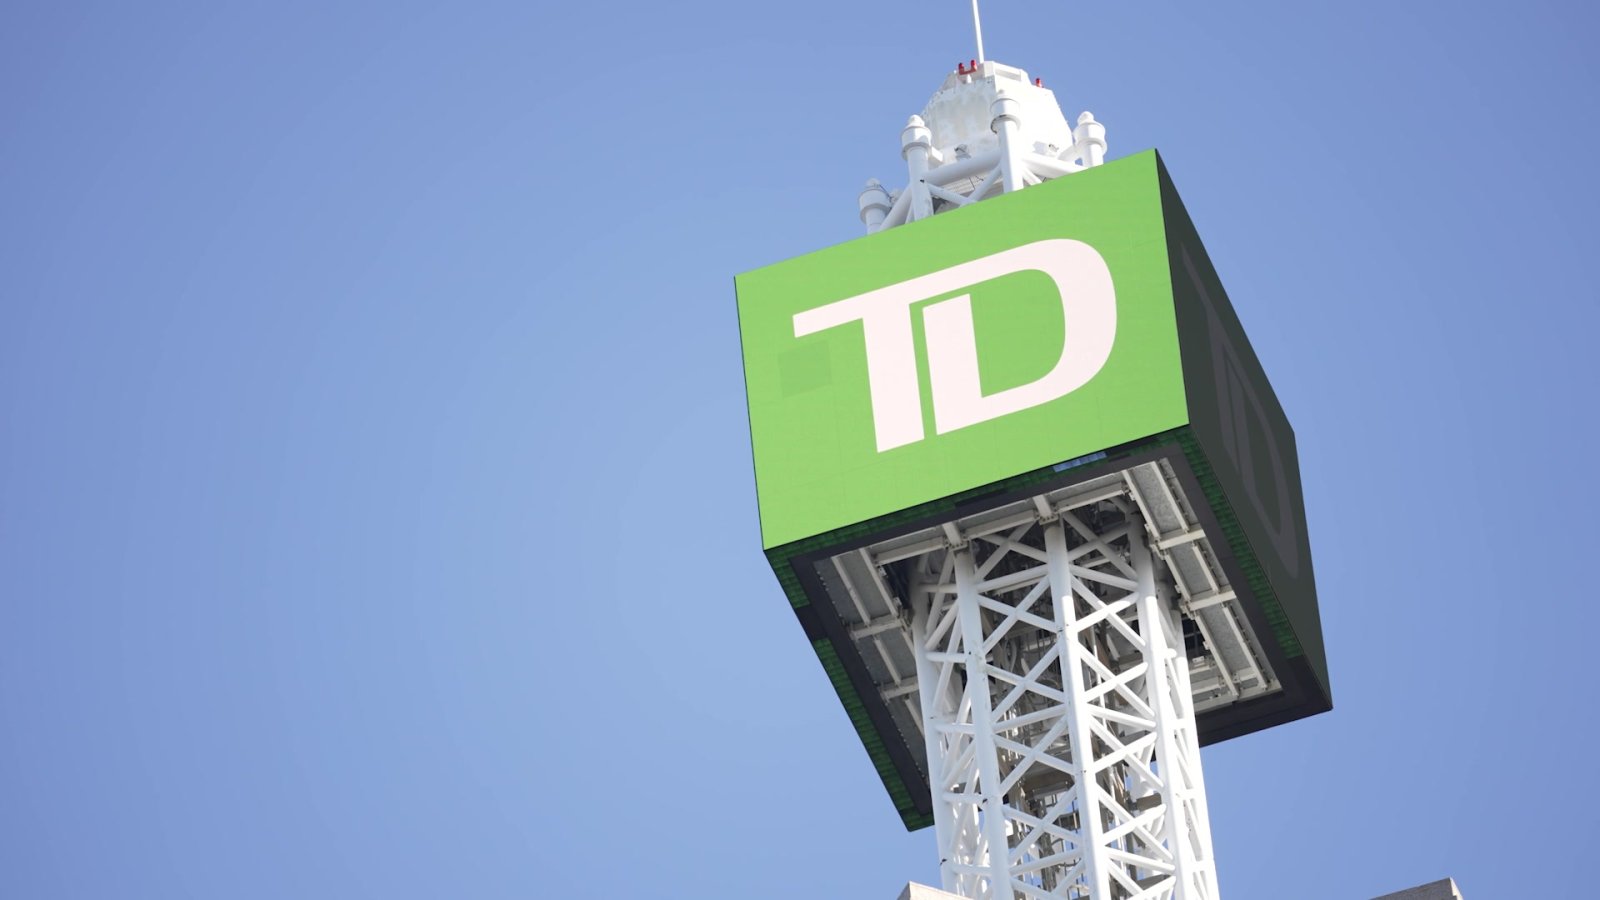 TD Bank is one of the Canadian brands applying for a colour trademark.